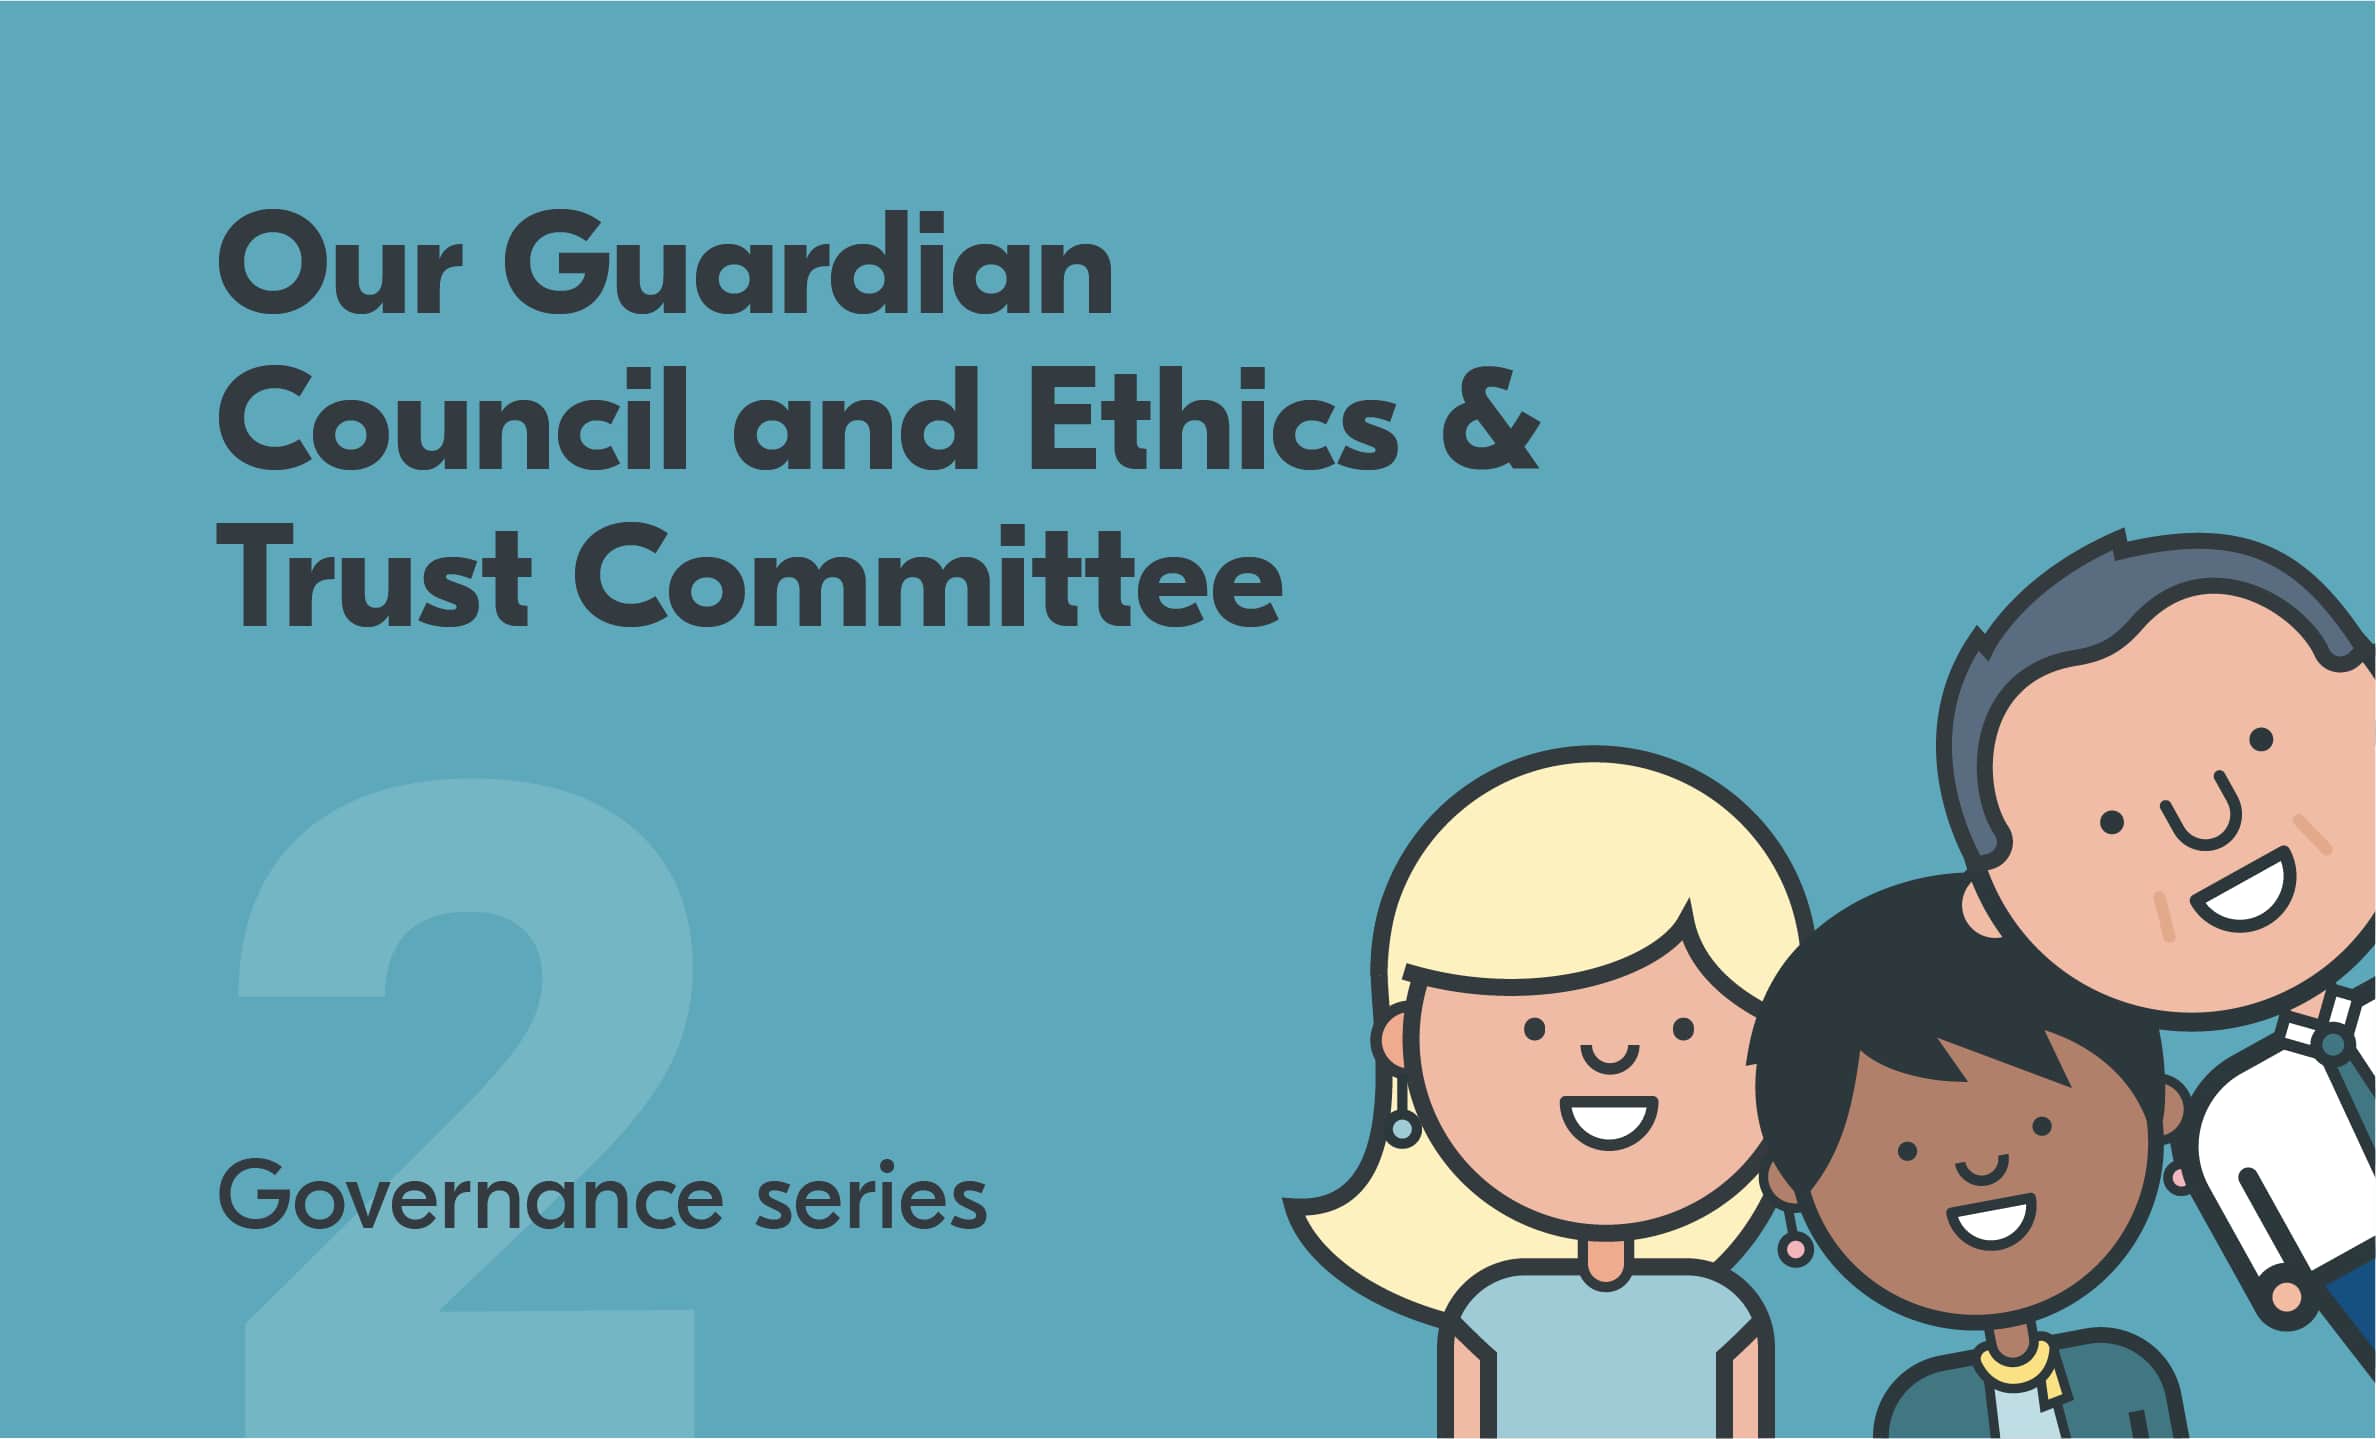 Graphic of people with the text: Governance series 2: Our Guardian Council and Ethics & Trust Committee